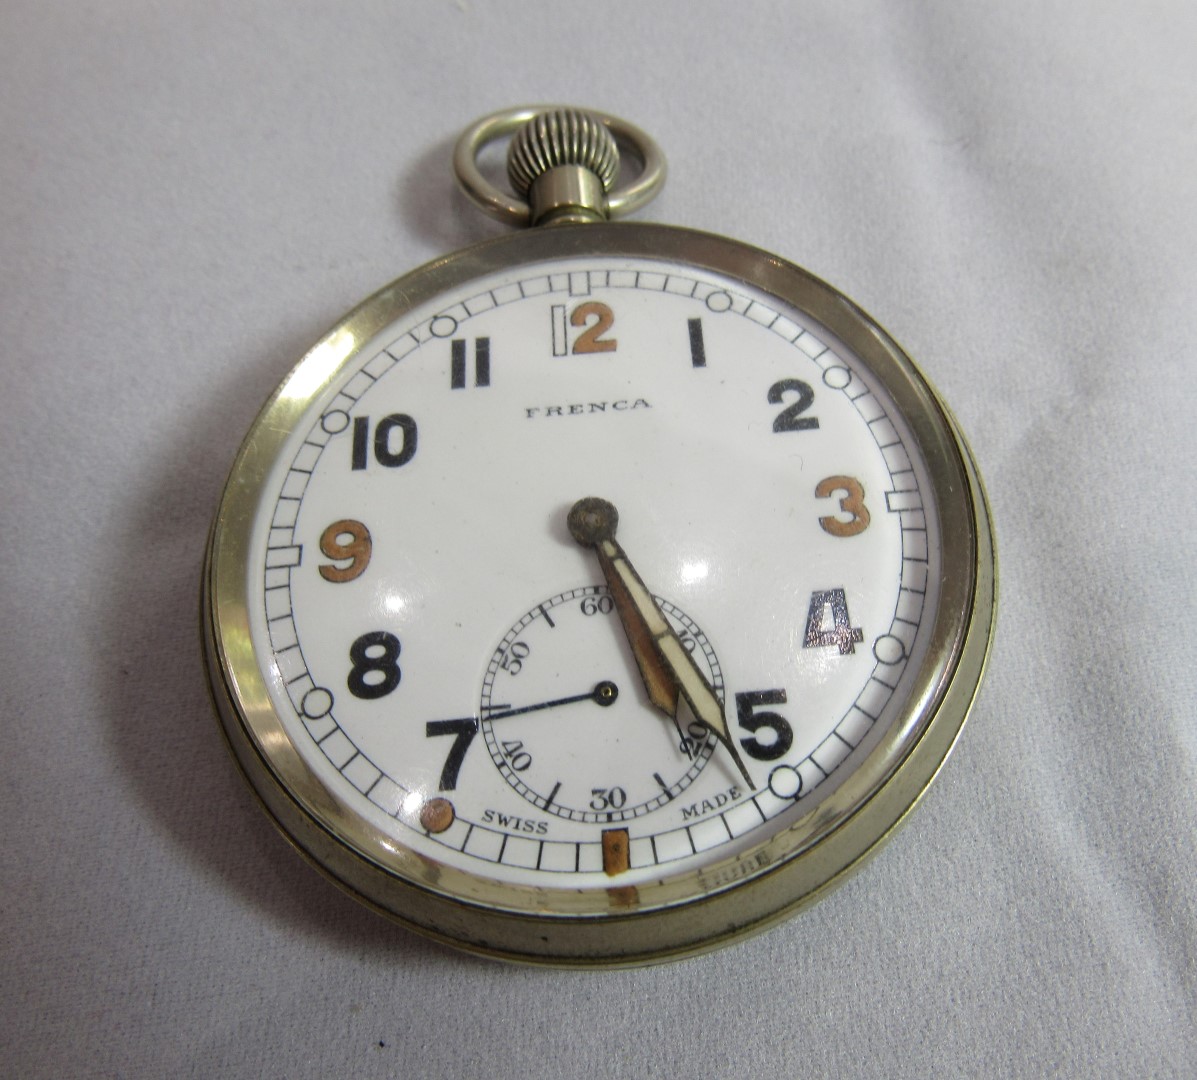 A military frenca metal open faced pocket watch GSTP Q11042